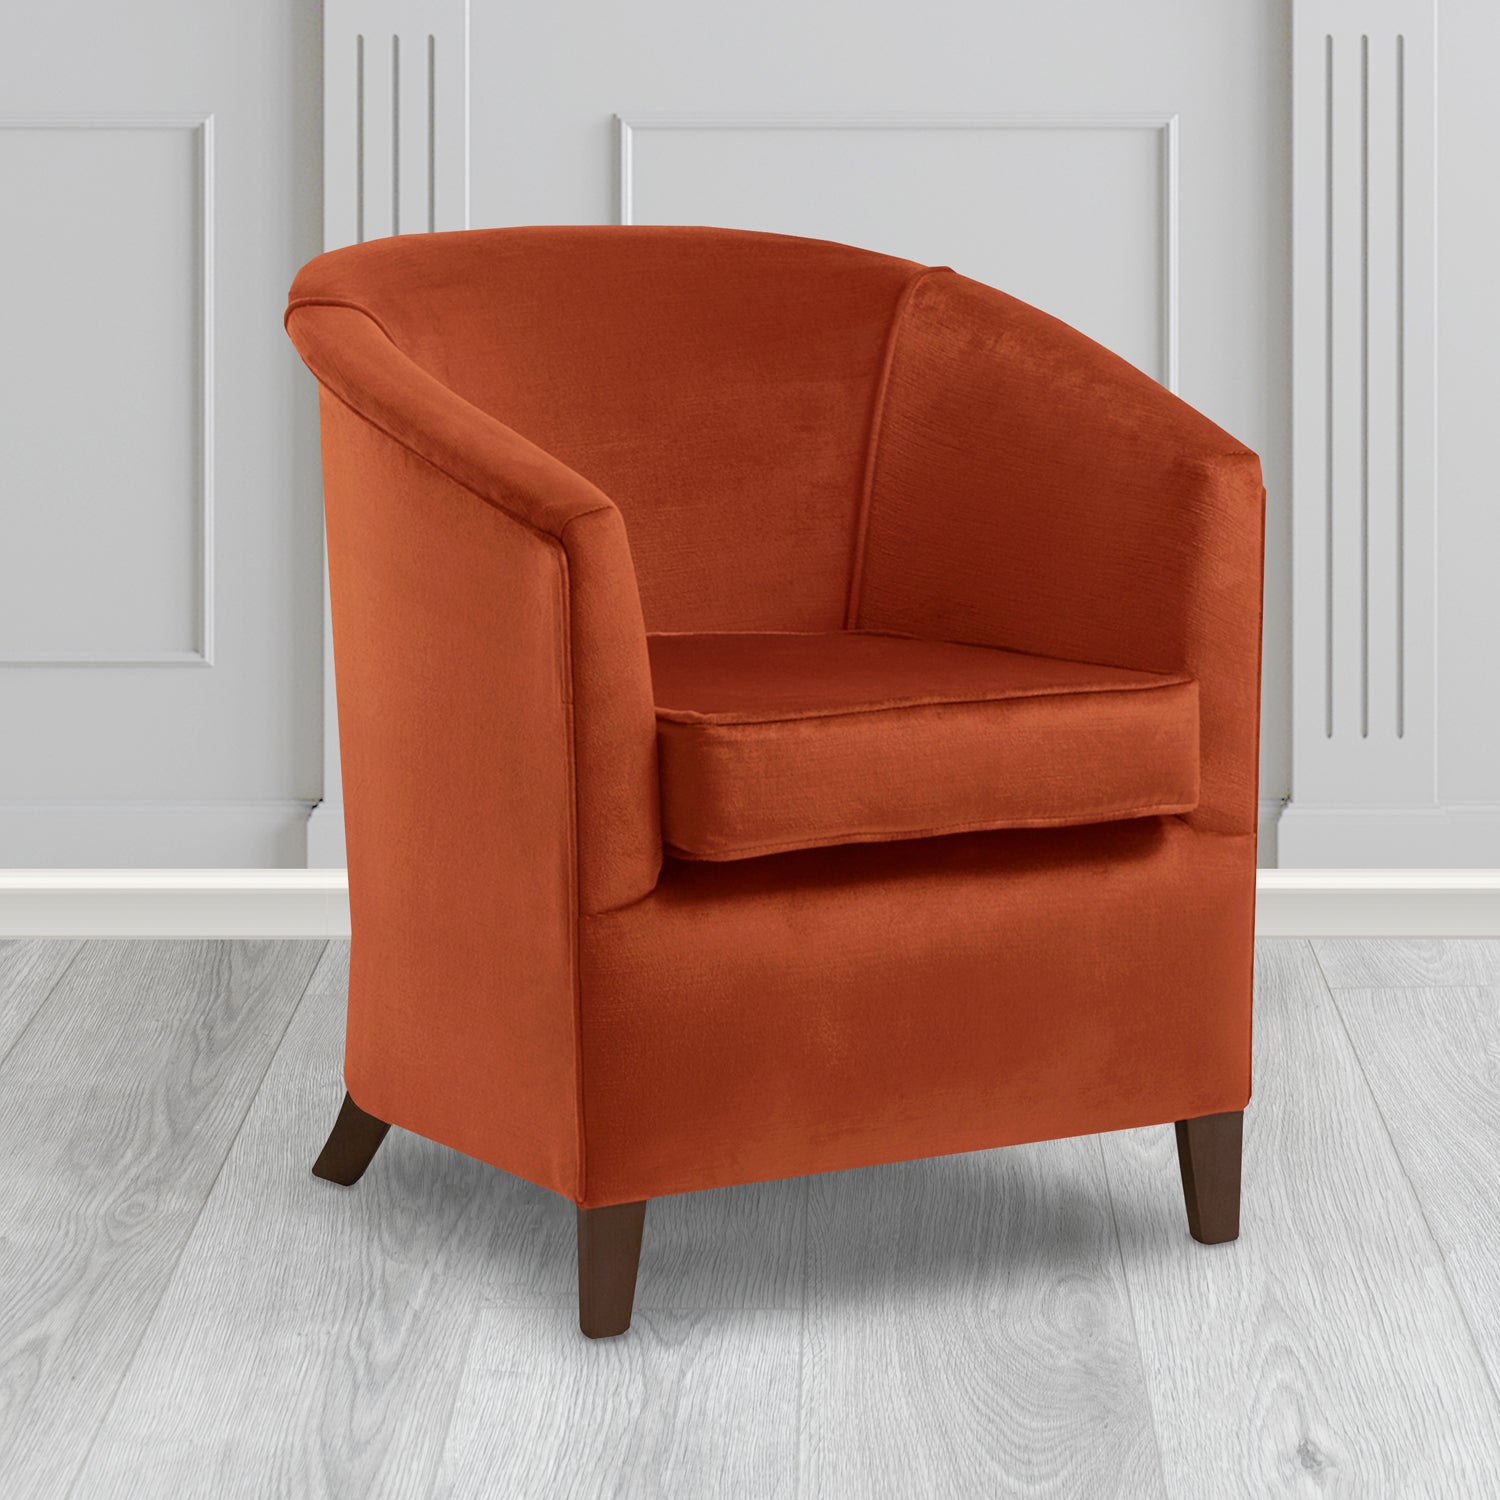 Jasmine Tub Chair in Noble 404 Henna Crib 5 Velvet Fabric - Water Resistant - The Tub Chair Shop